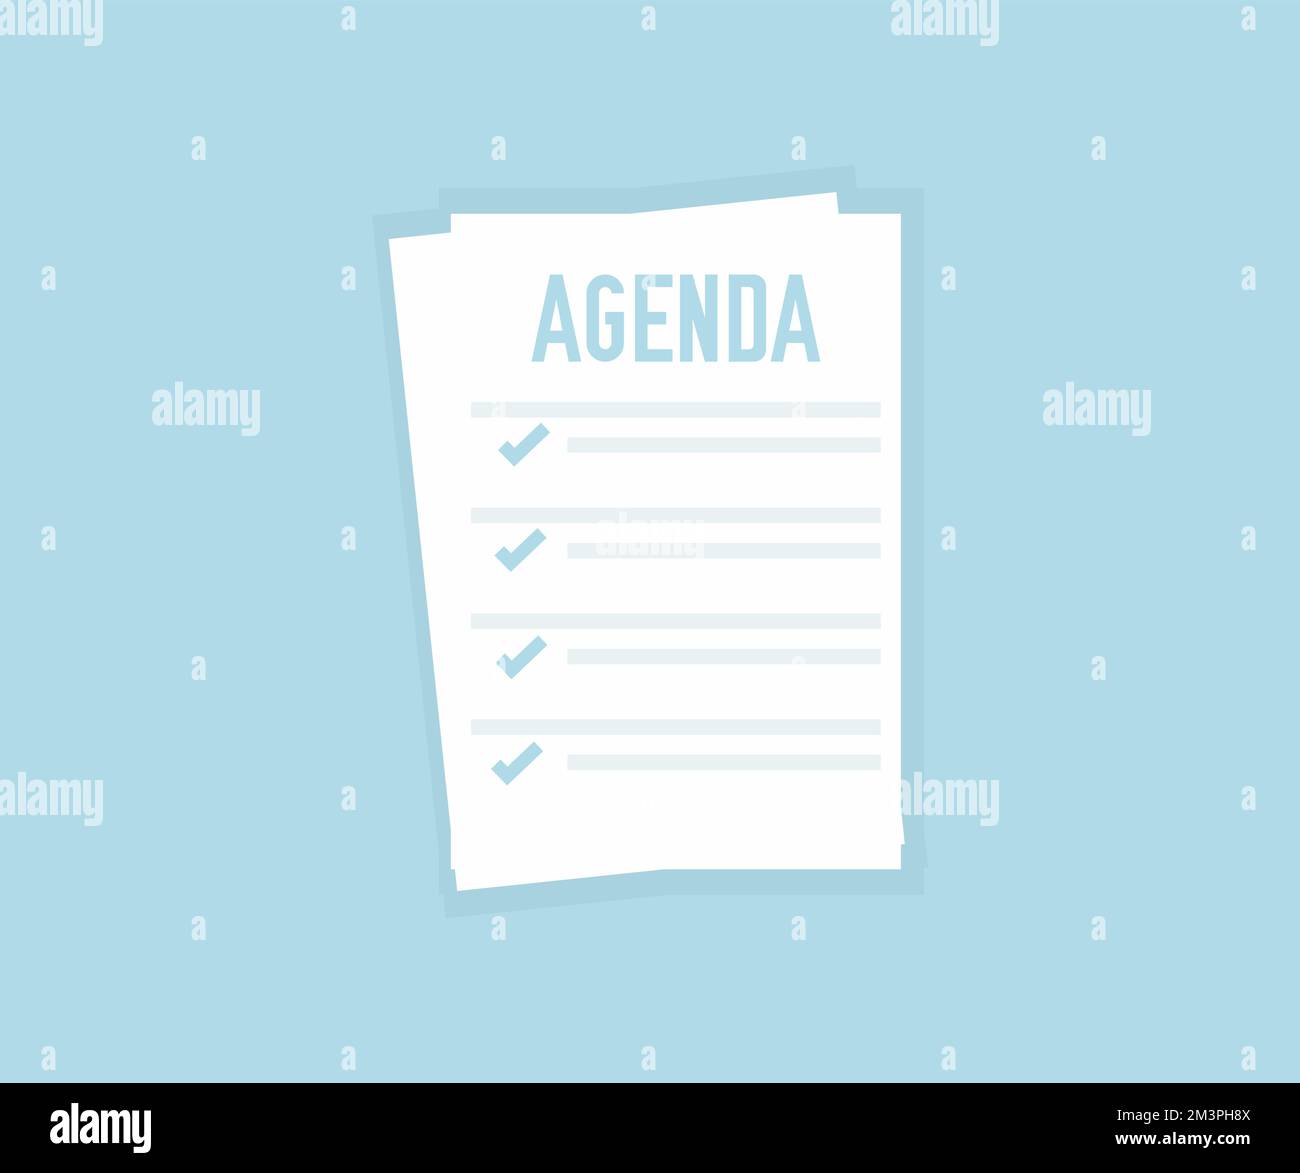 Agenda. Daily Productivity Planner. Event planner timetable agenda plan logo design. Time management. Appointment schedule icon  vector design. Stock Vector